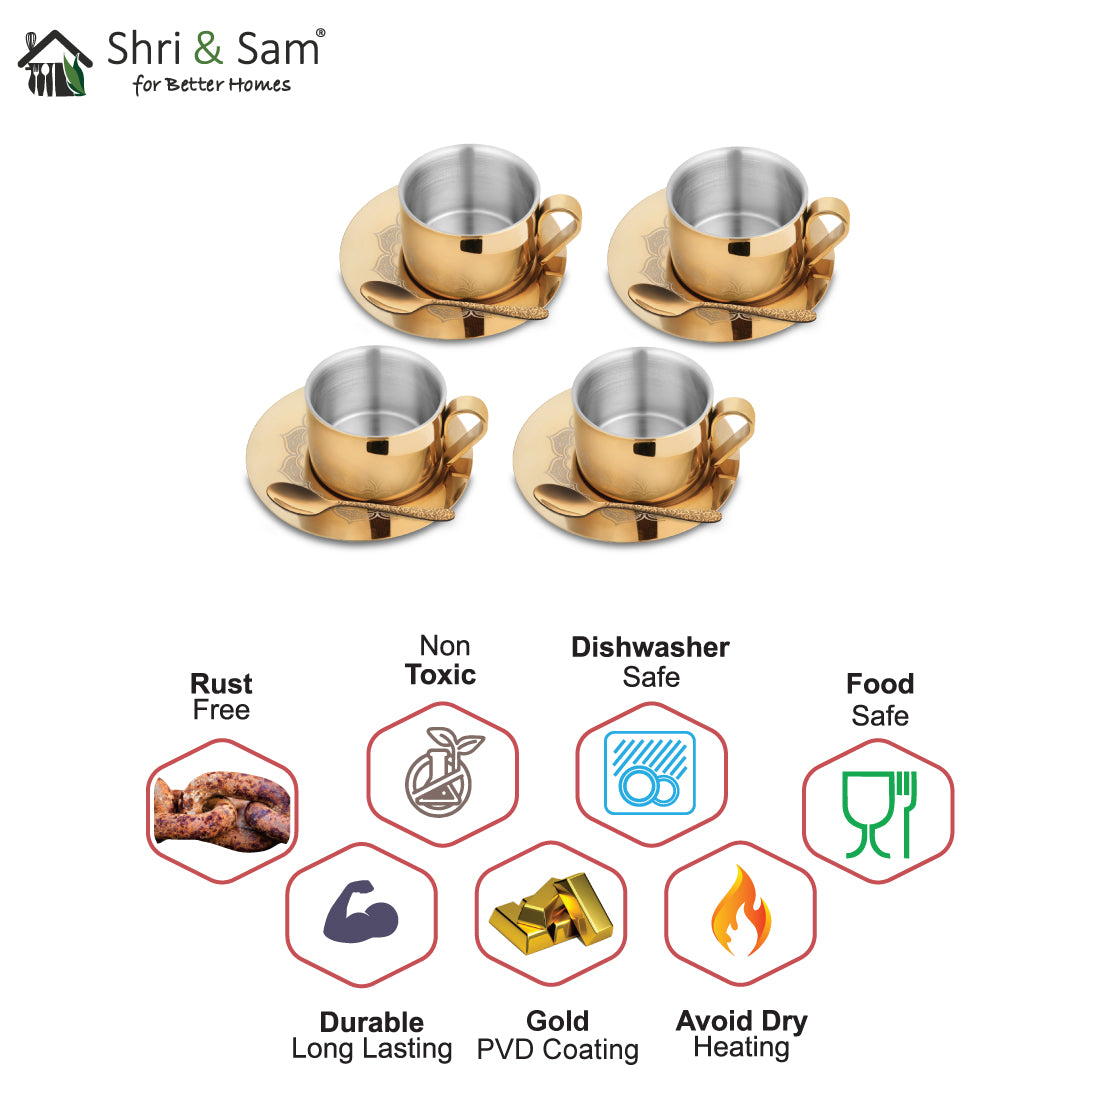 Stainless Steel 4 PCS Double Wall Cup and Saucer with Gold PVD Coating & Laser First Impression